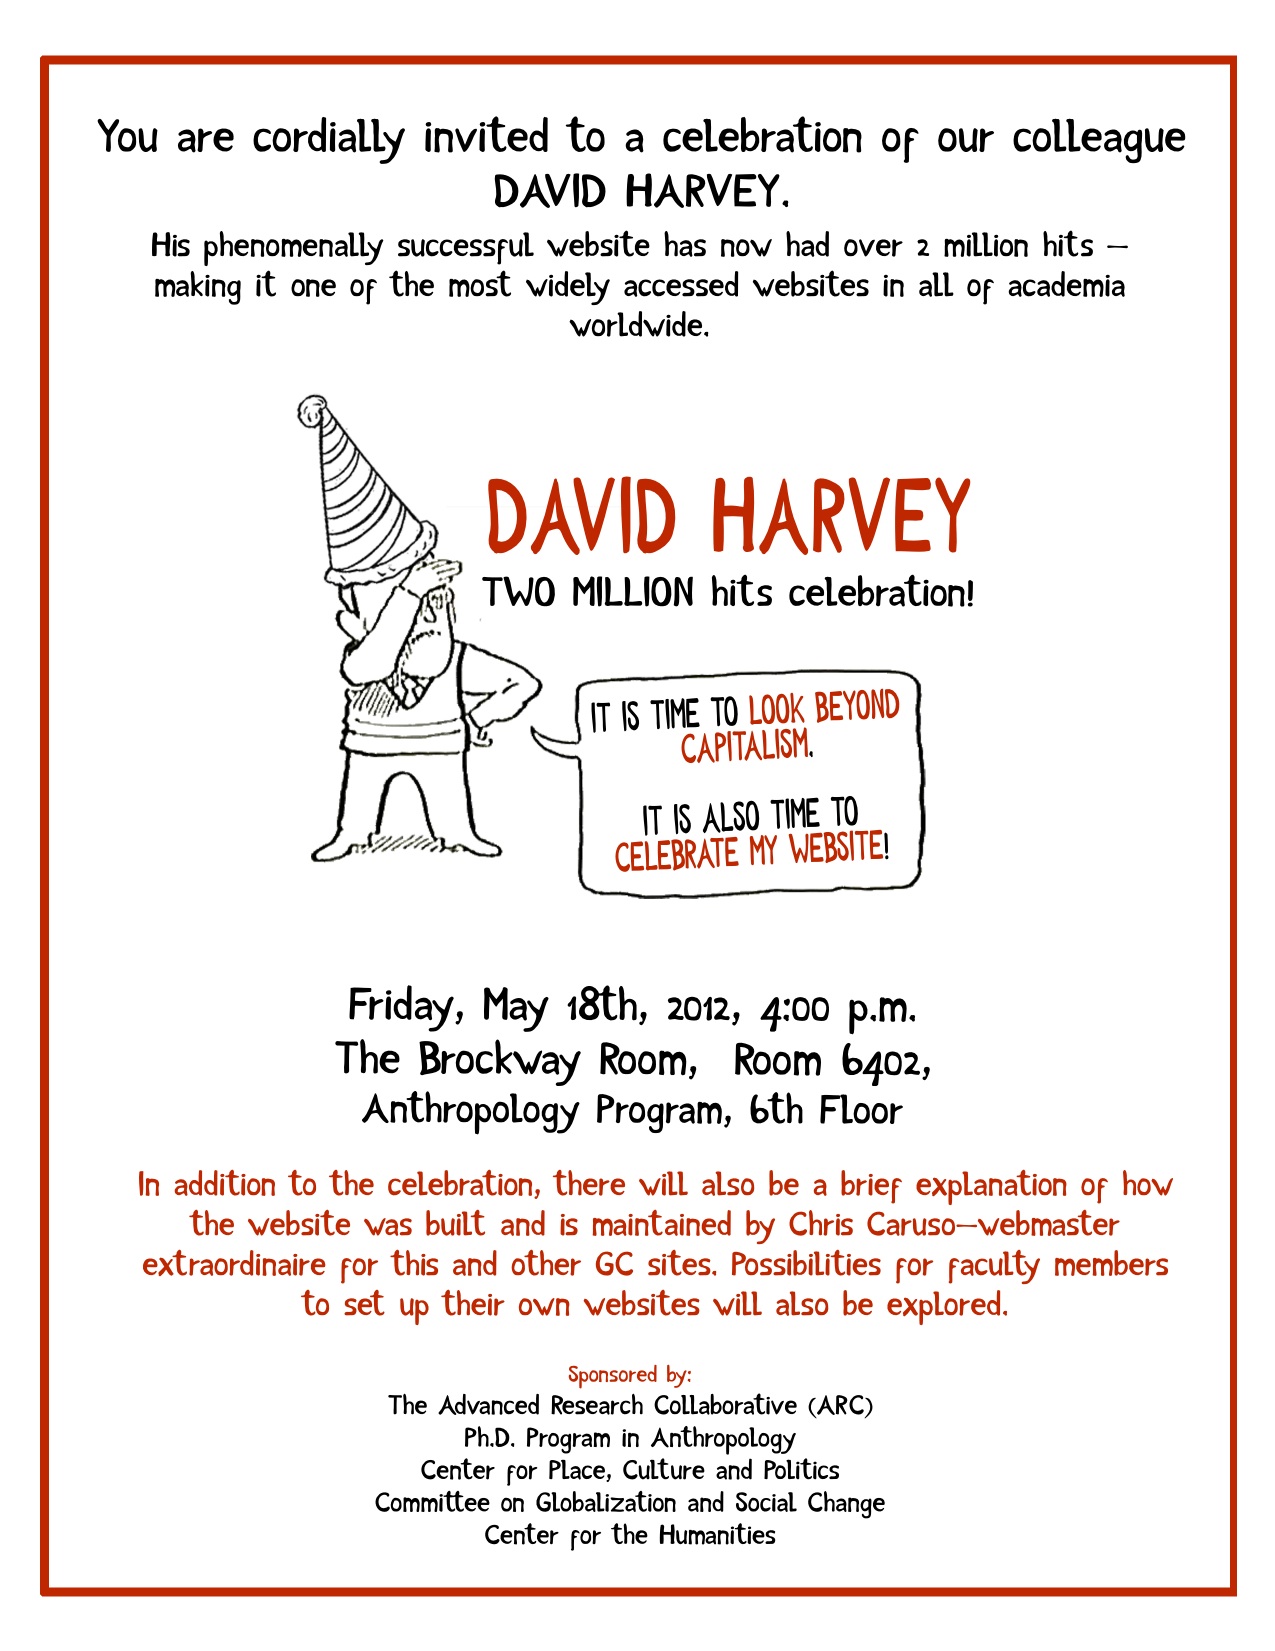 Celebrate with David Harvey: two million hits on his website—www.davidharvey.org